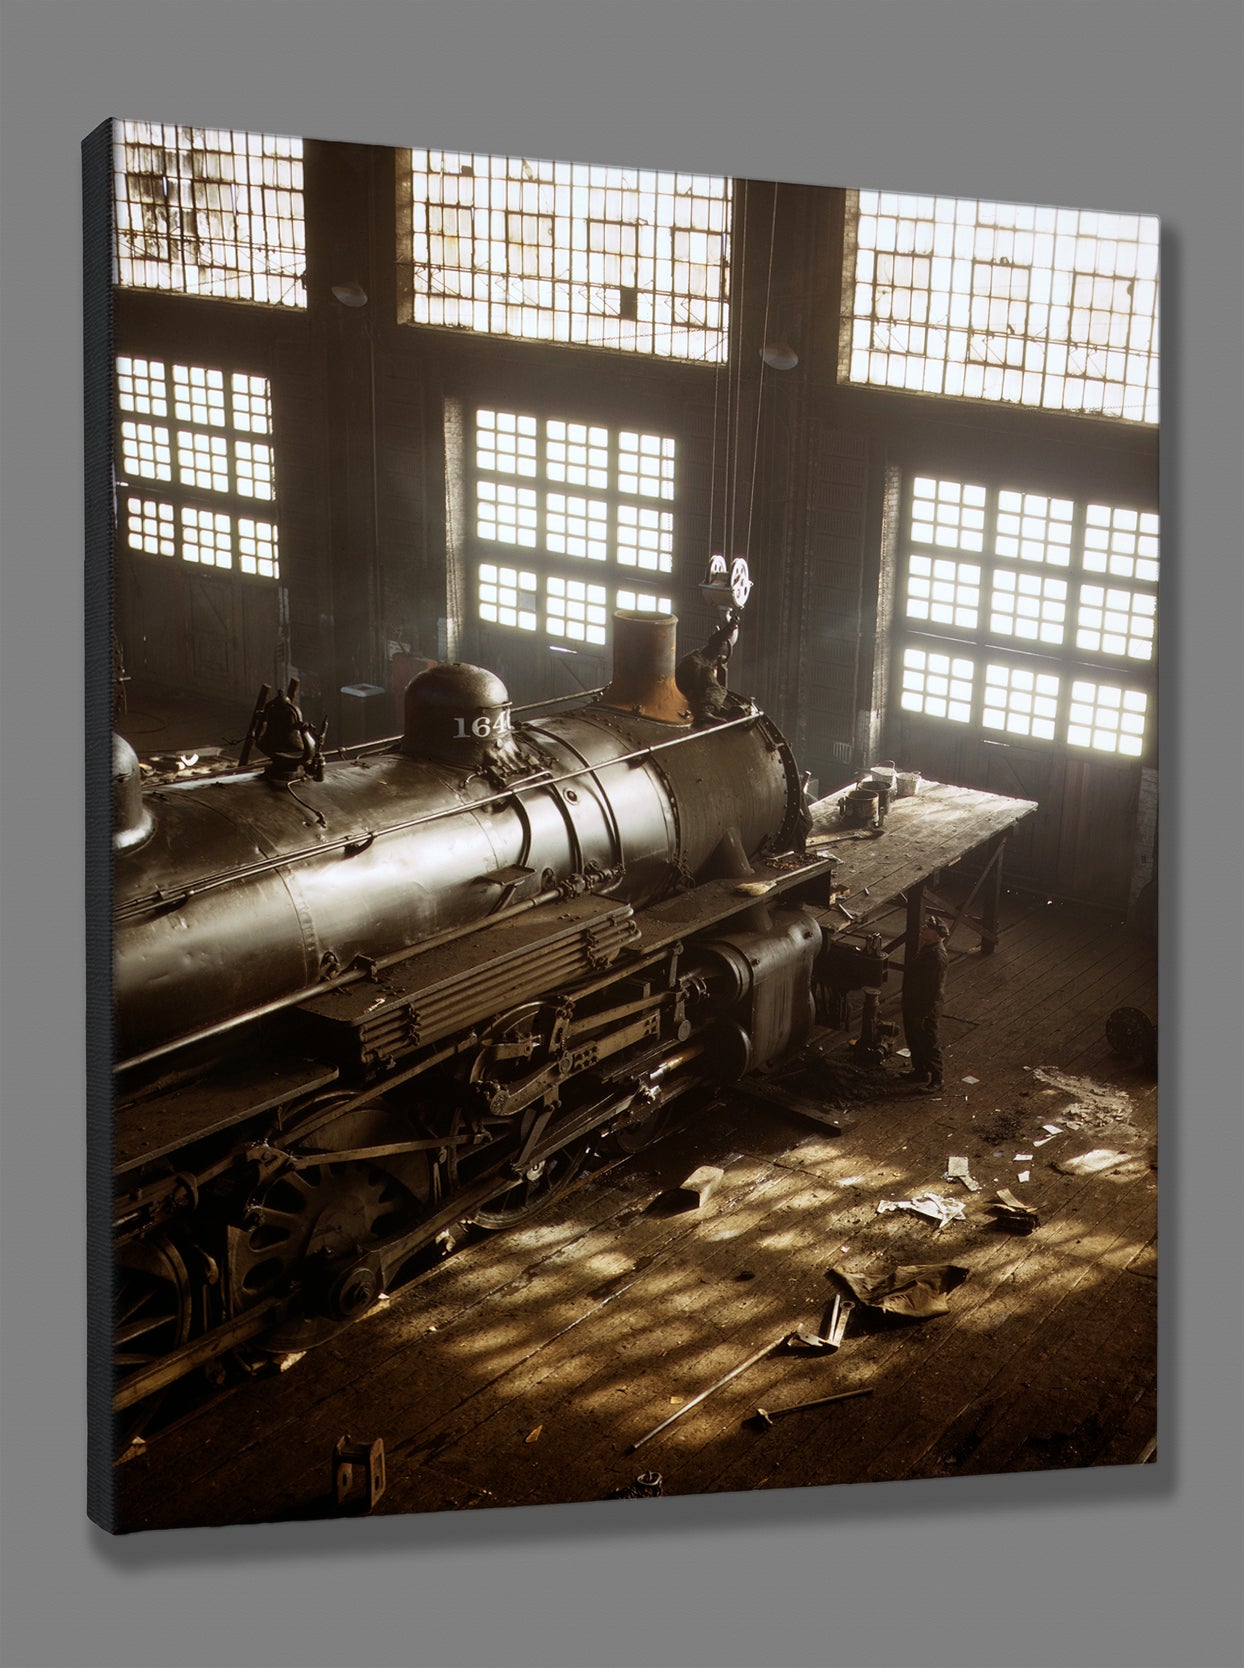 A canvas print of a vintage image of a train car in the Railroad Shops